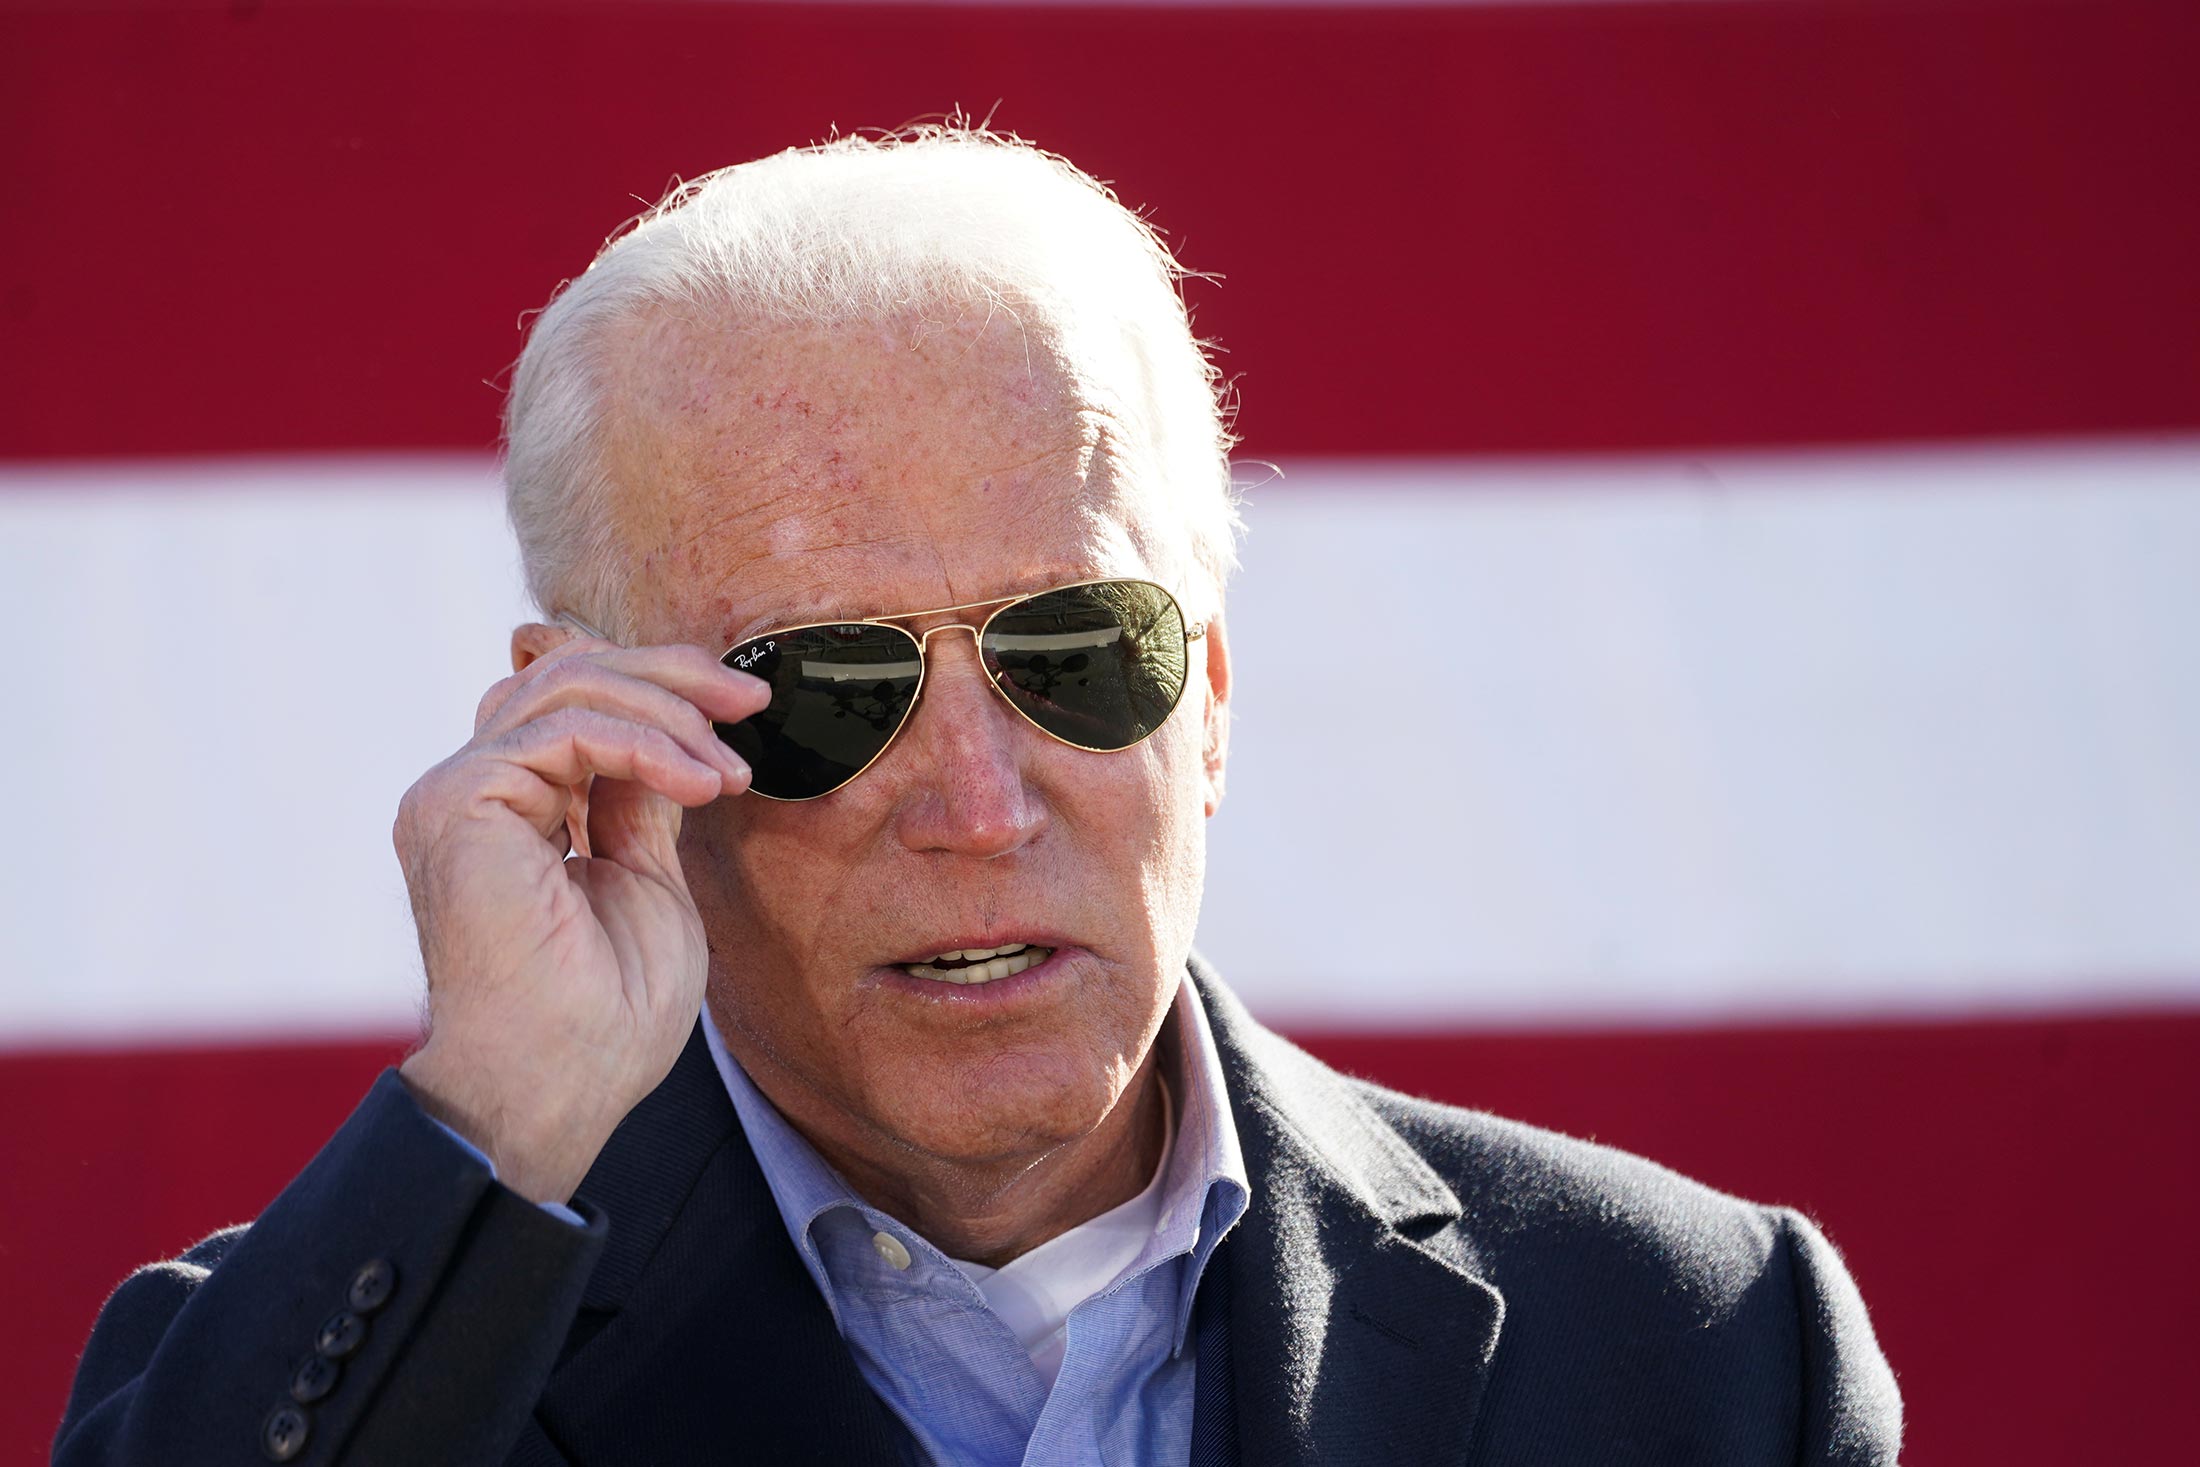 Election 2020: What President Biden Means for Business and the